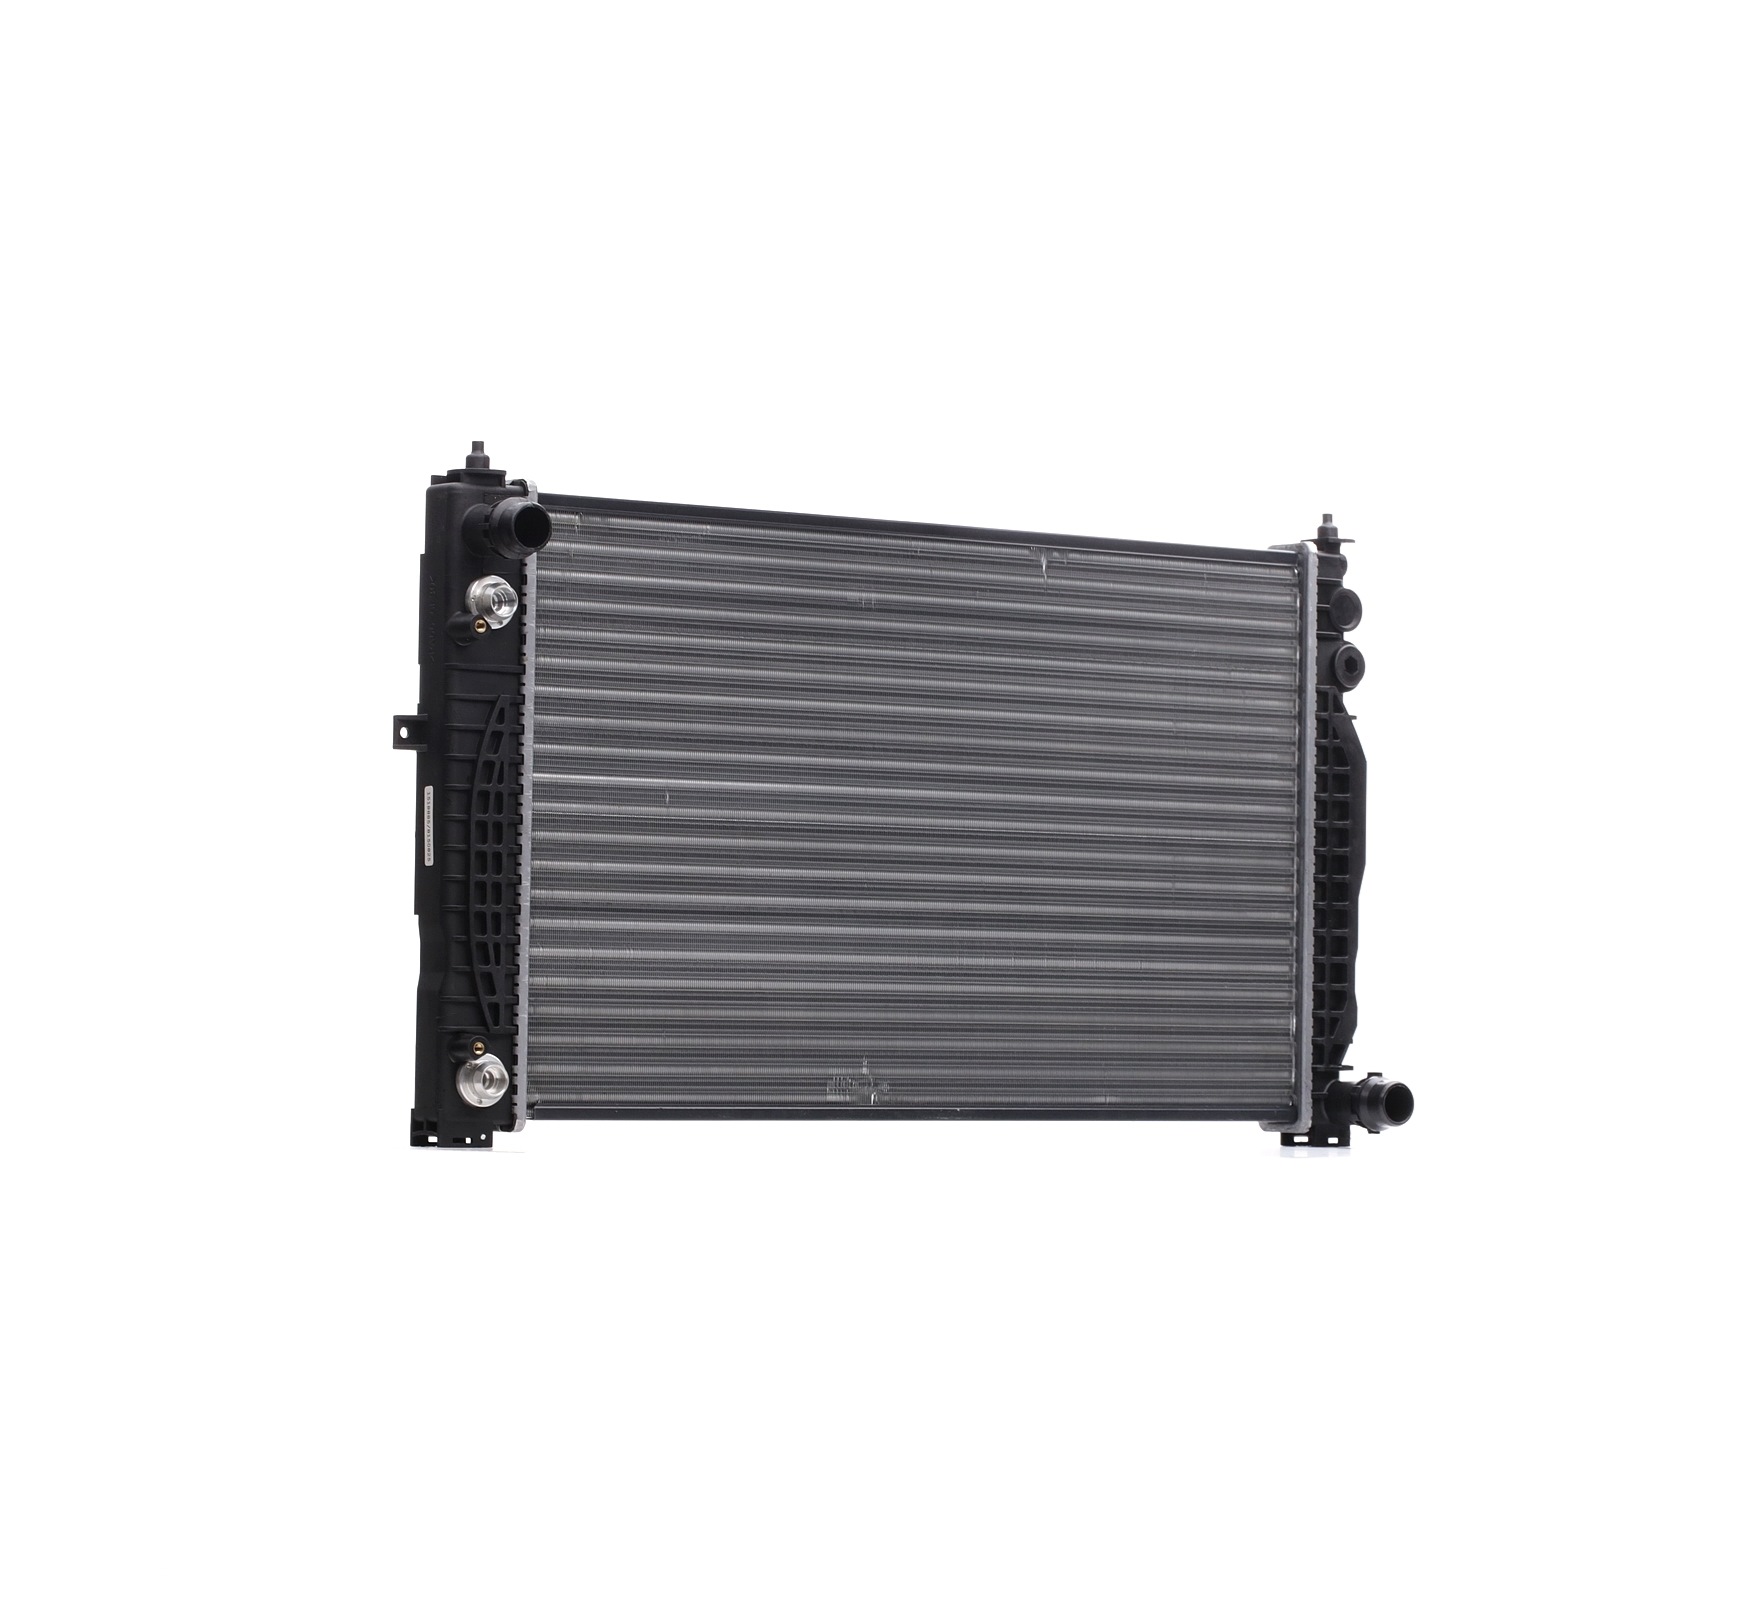 RIDEX 470R0200 Engine radiator Aluminium, Plastic, for vehicles with/without air conditioning, Automatic Transmission, Mechanically jointed cooling fins